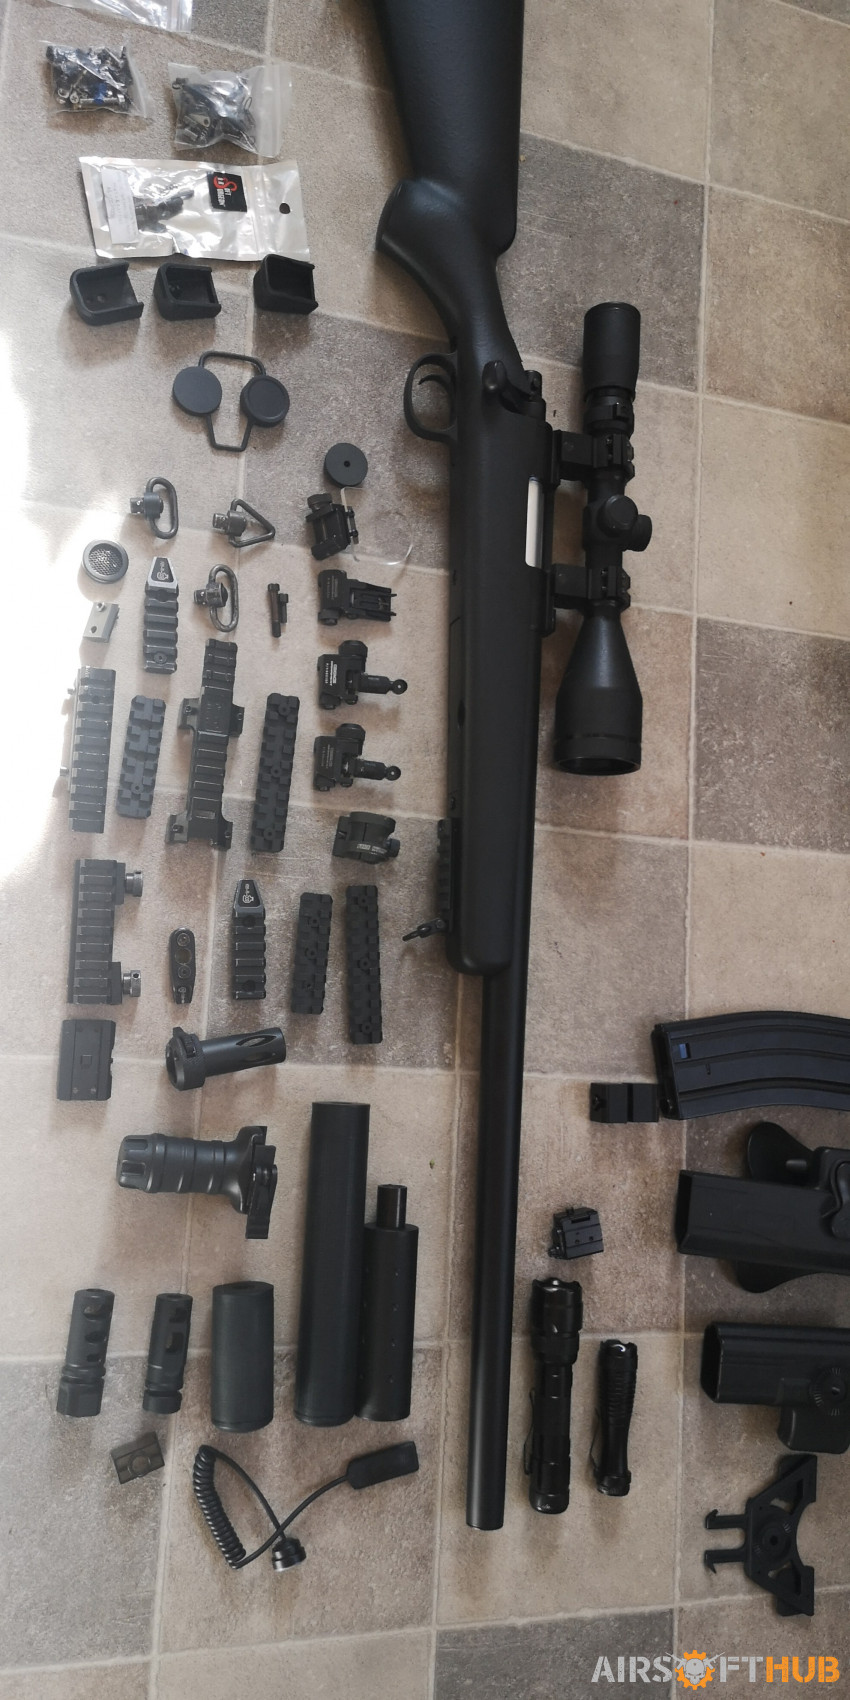 Airsoft bundle *updated* - Used airsoft equipment